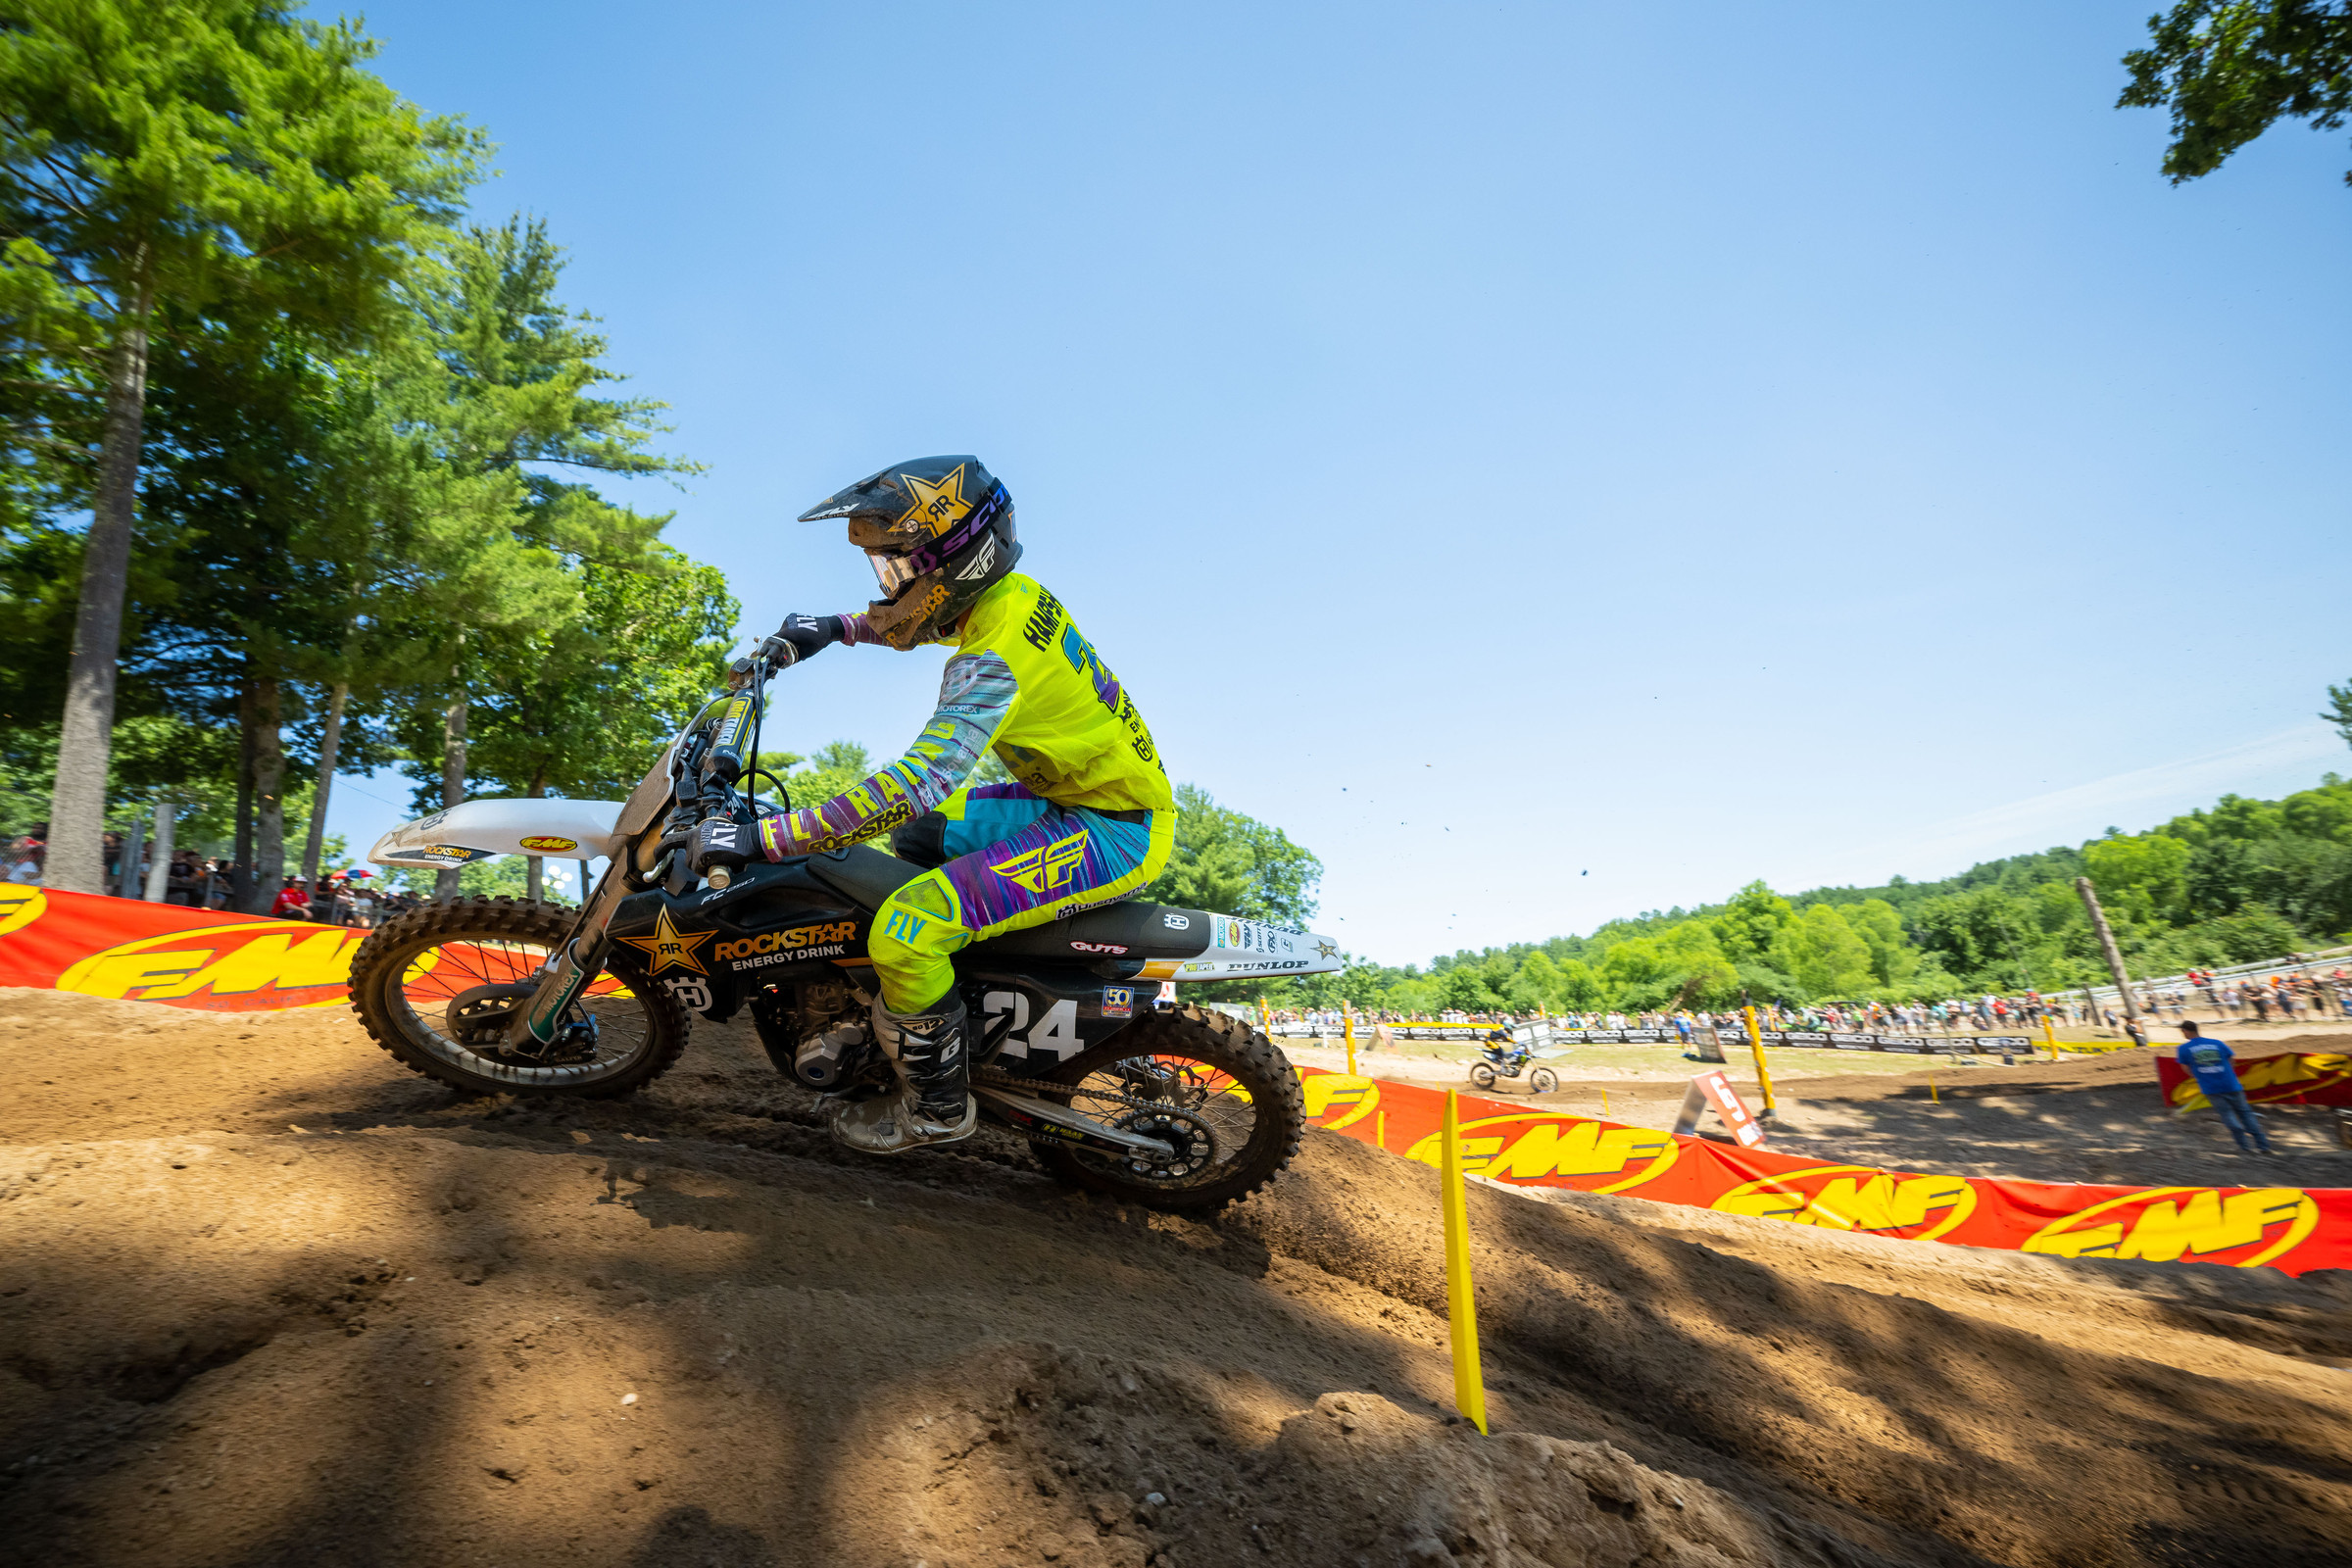 How to Watch/Stream Washougal National and MXGP of Flanders on TV and Online